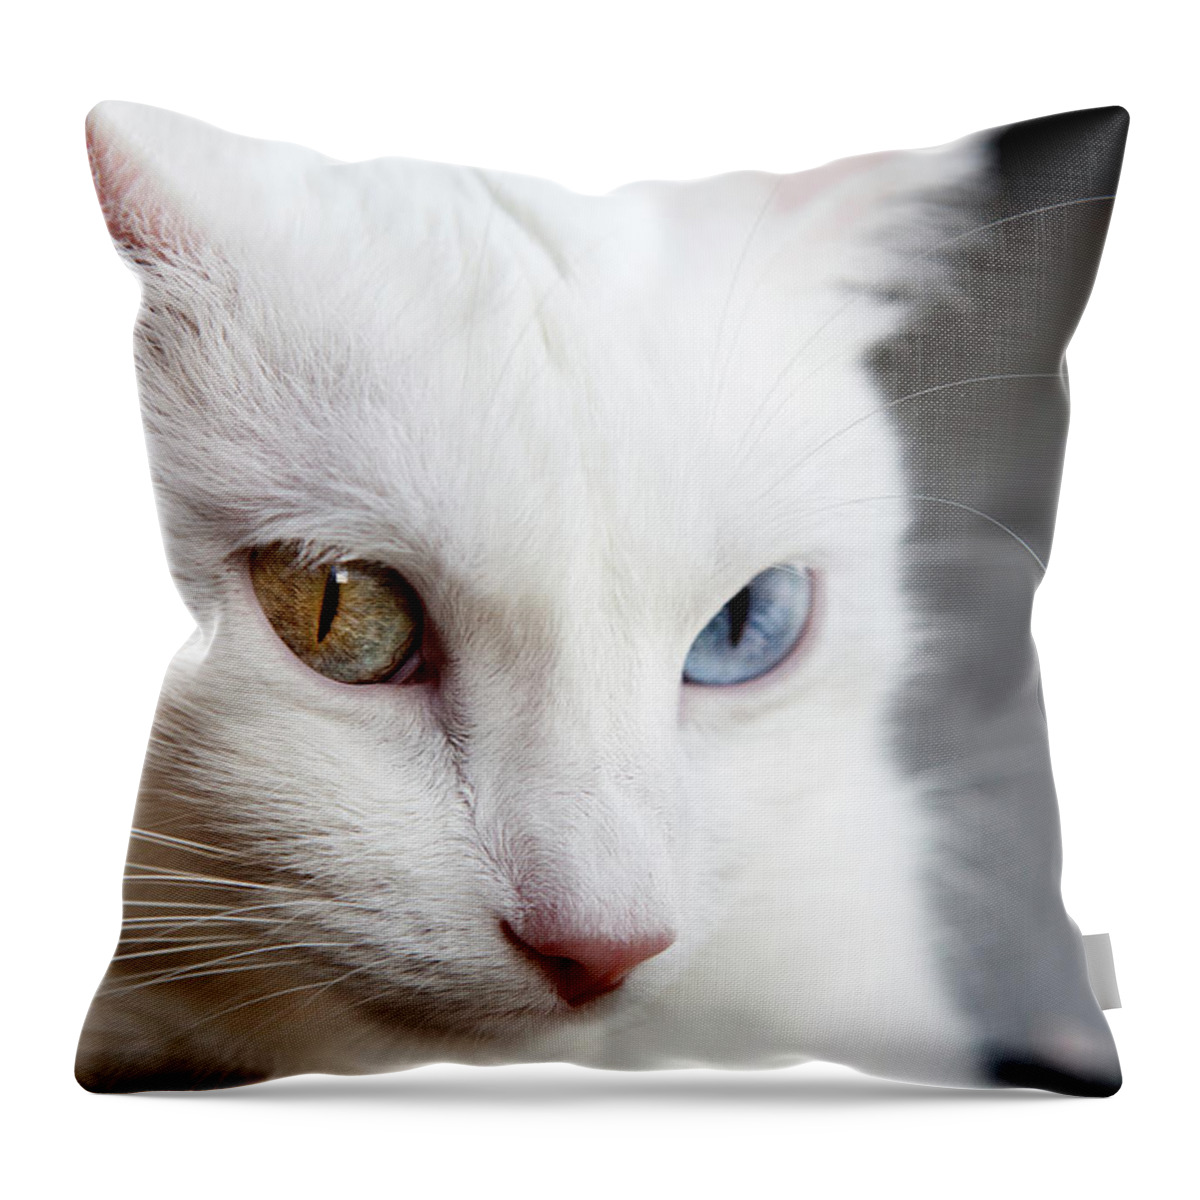 Jorgemaiaphotographer Throw Pillow featuring the photograph The eyes by Jorge Maia